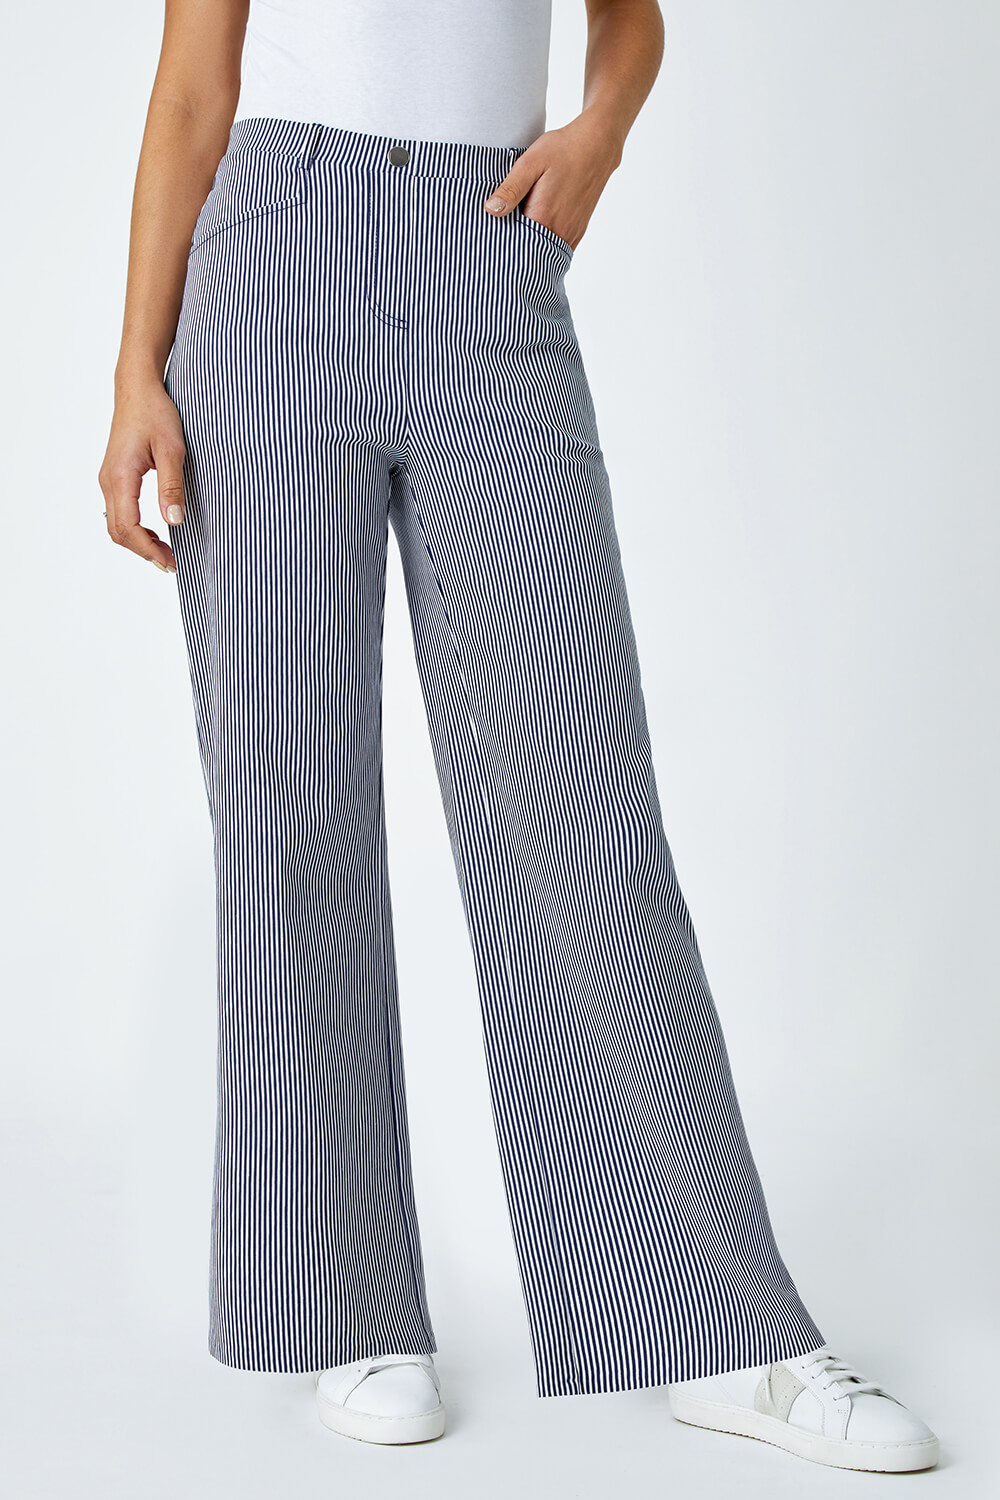 Navy  Striped Wide Leg Stretch Trousers, Image 5 of 5